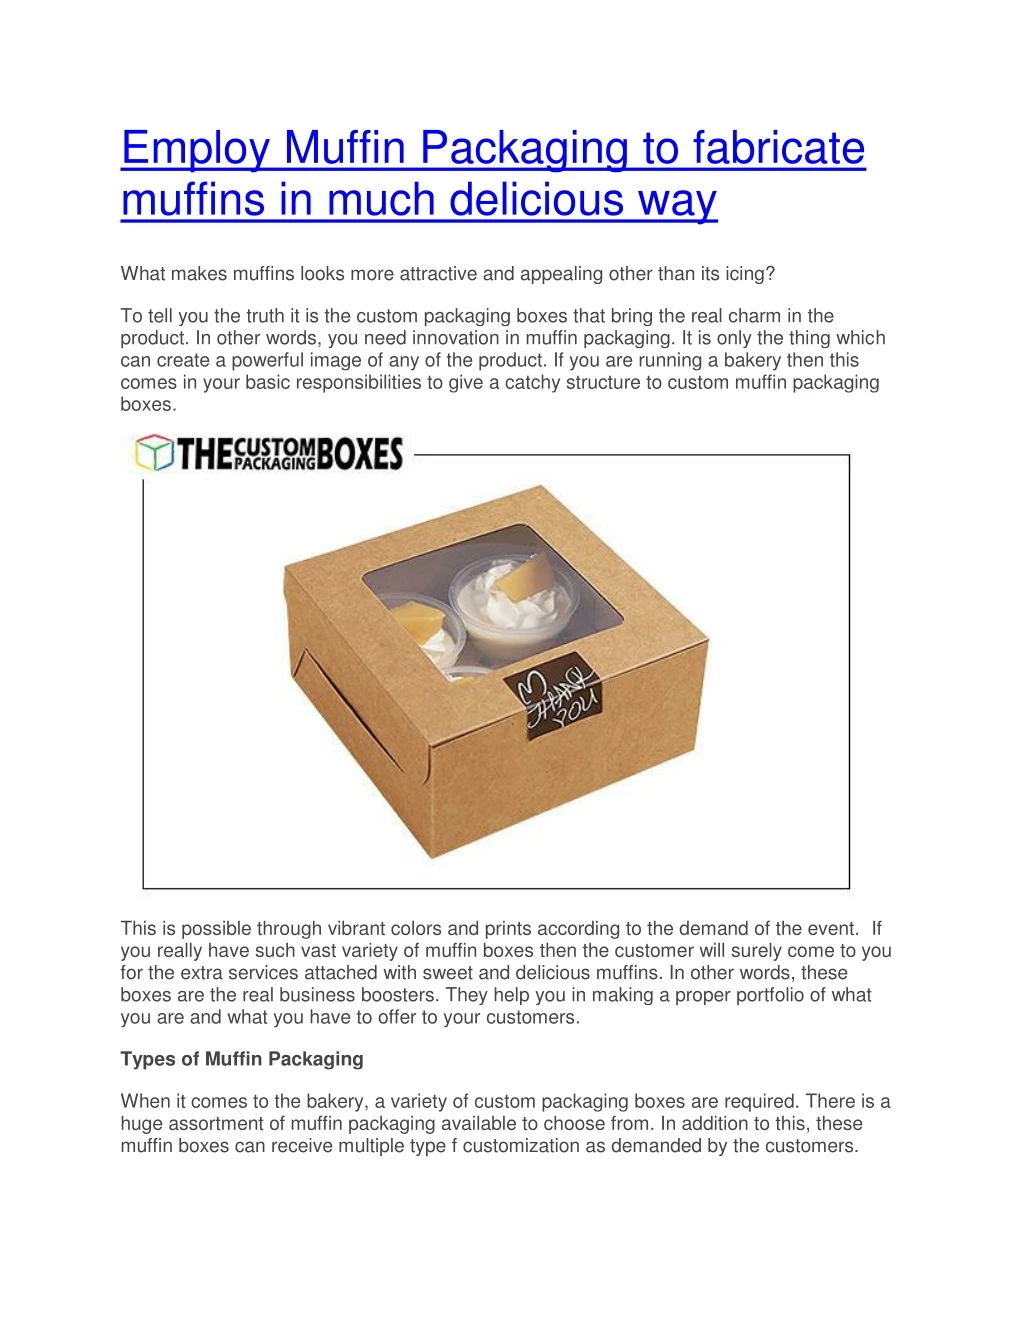 employ muffin packaging to fabricate muffins